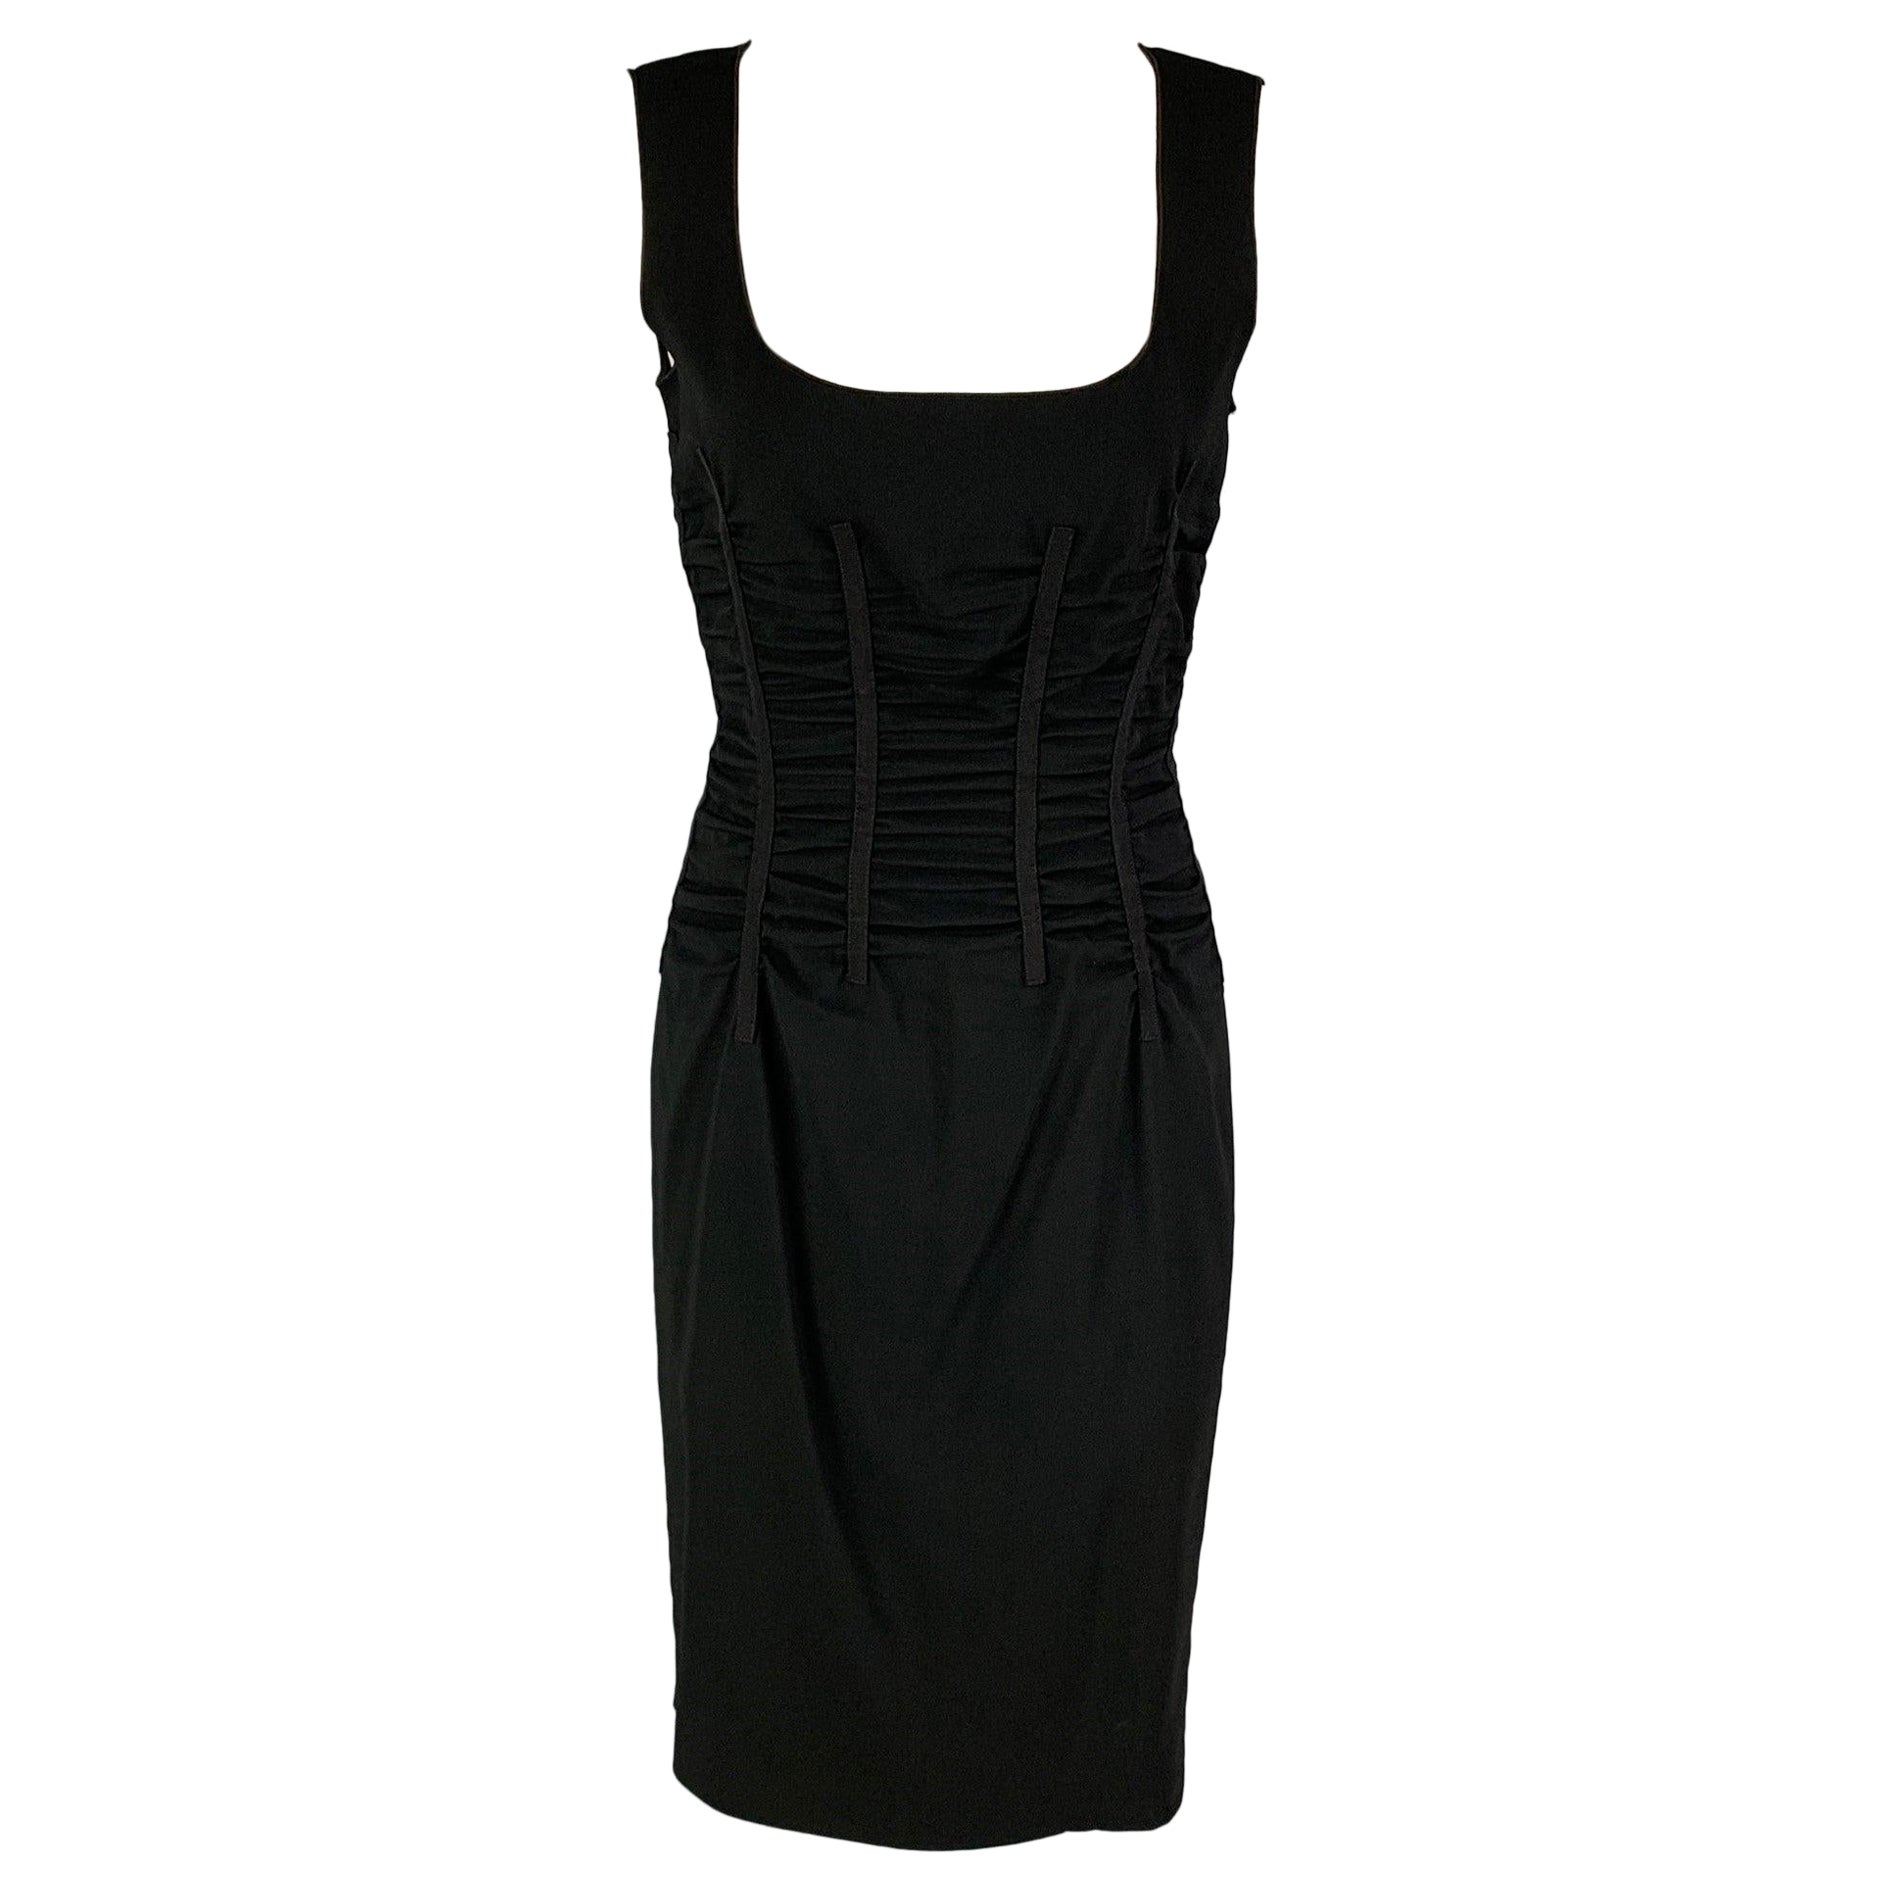 DOLCE & GABBANA Size 6 Black Acetate Blend Ruched Sleeveless Cocktail Dress For Sale